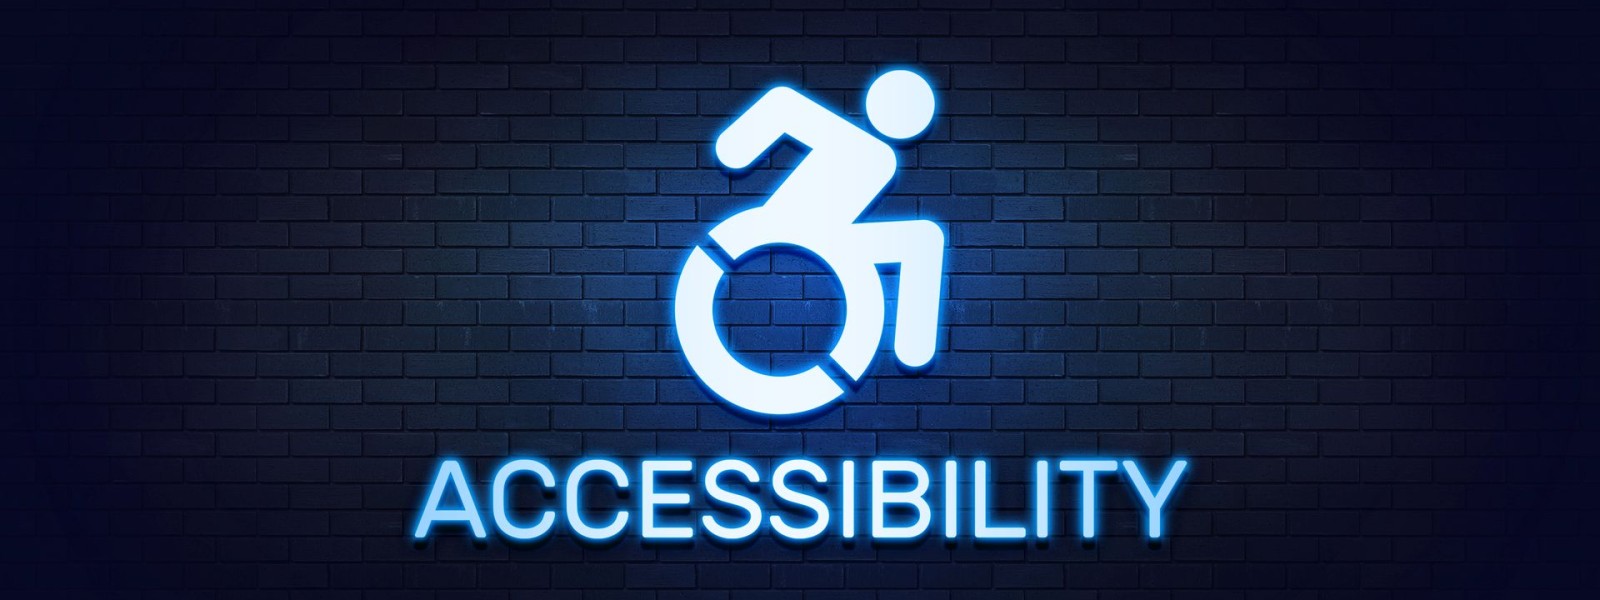 The word Accessibility below a recognised accessibility symbol